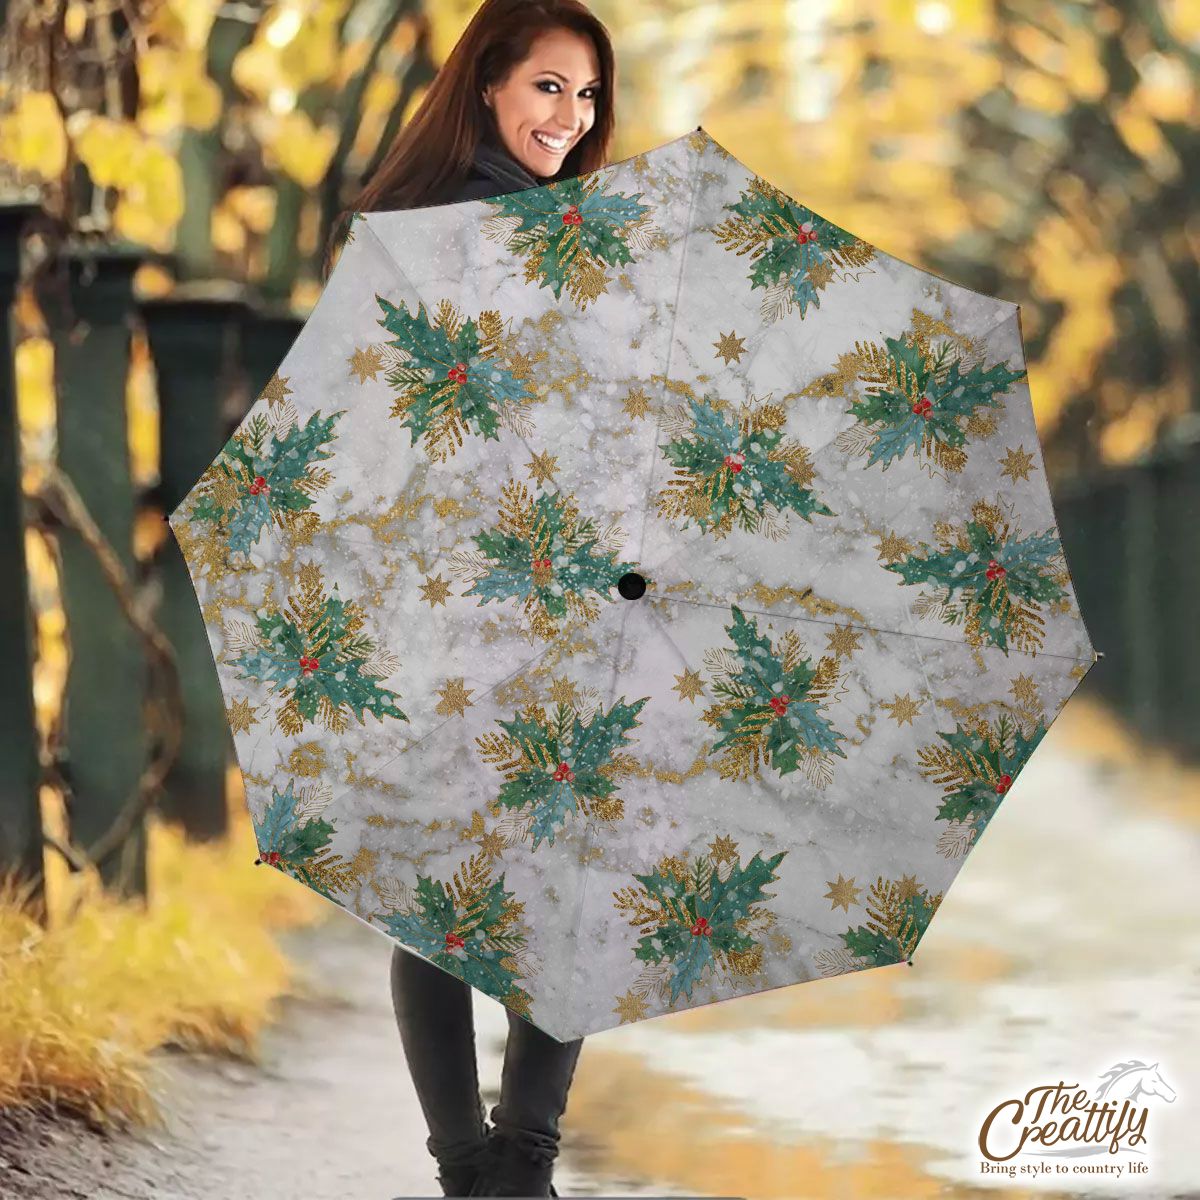 Holly Leaf With Christmas Star Marble Background Umbrella